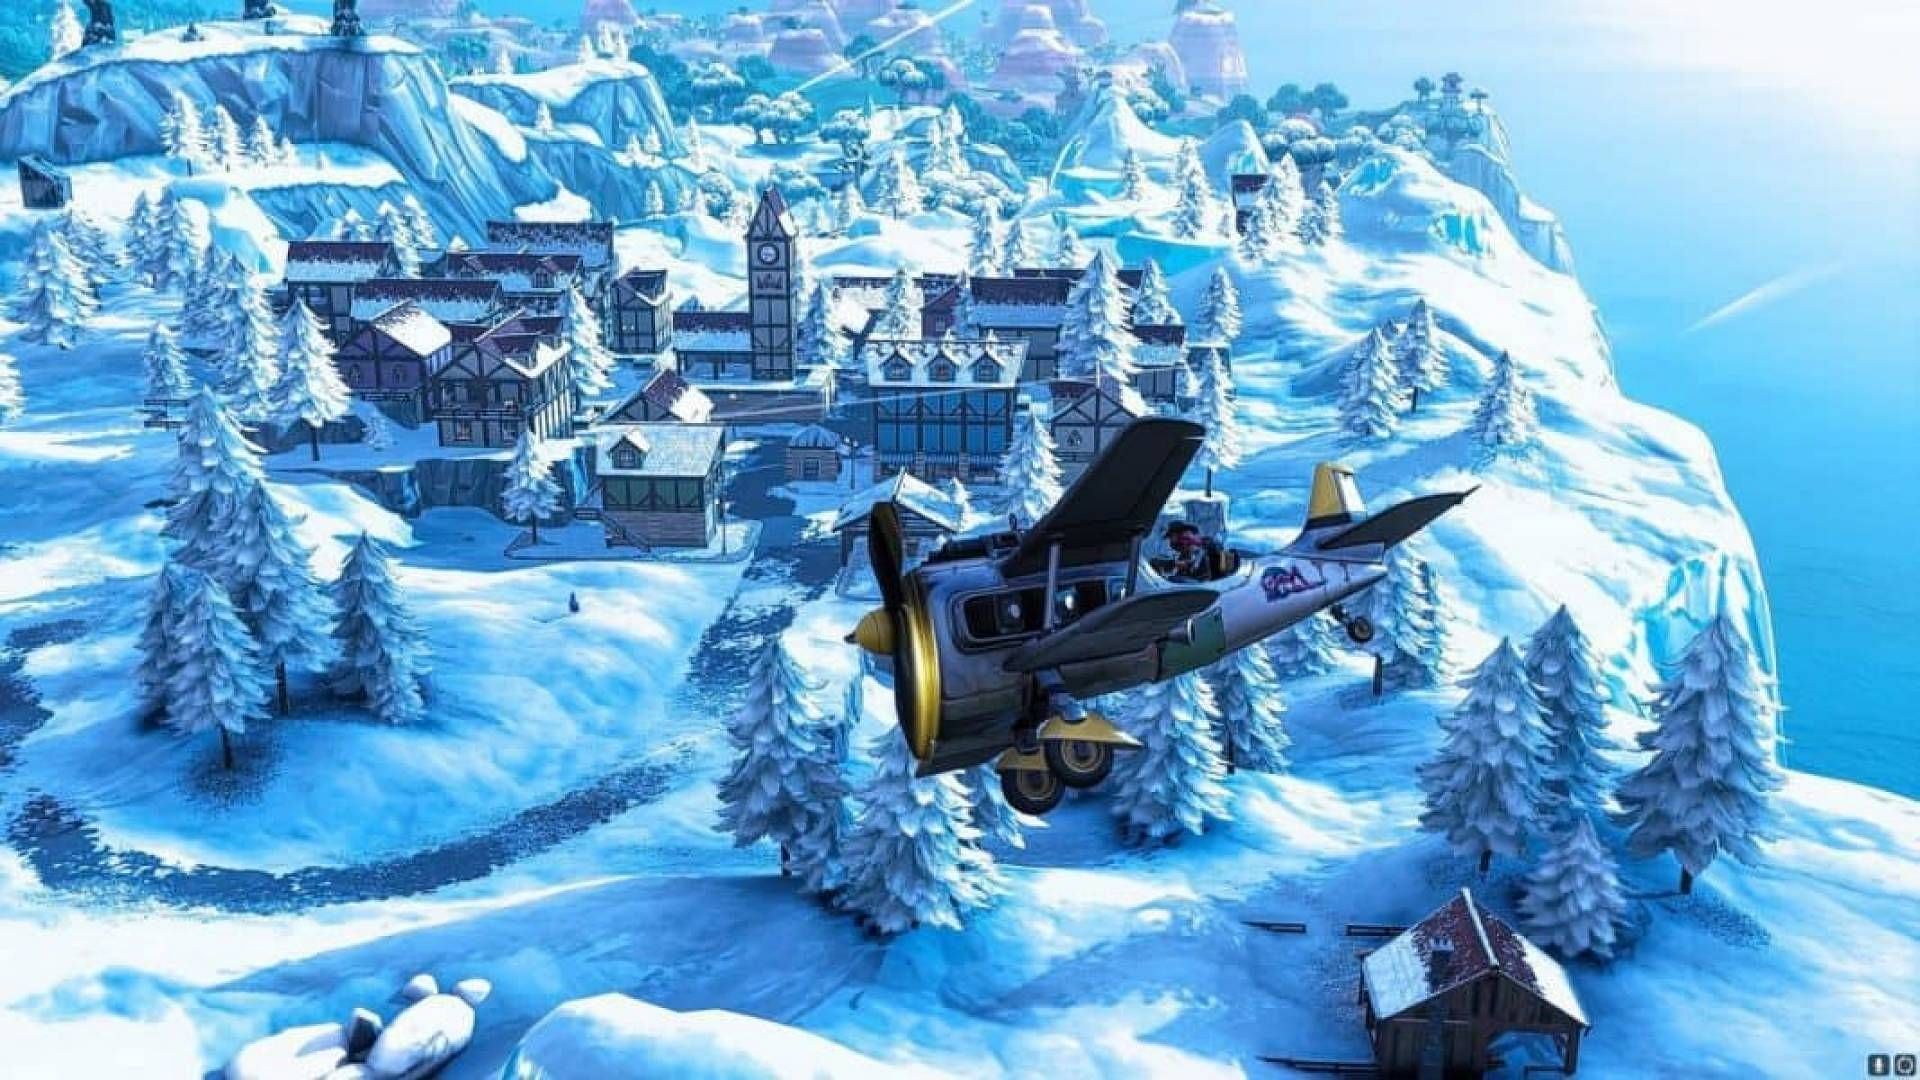 The Snow Fortnite biome was first released in Chapter 1 Season 7 (Image via Epic Games)